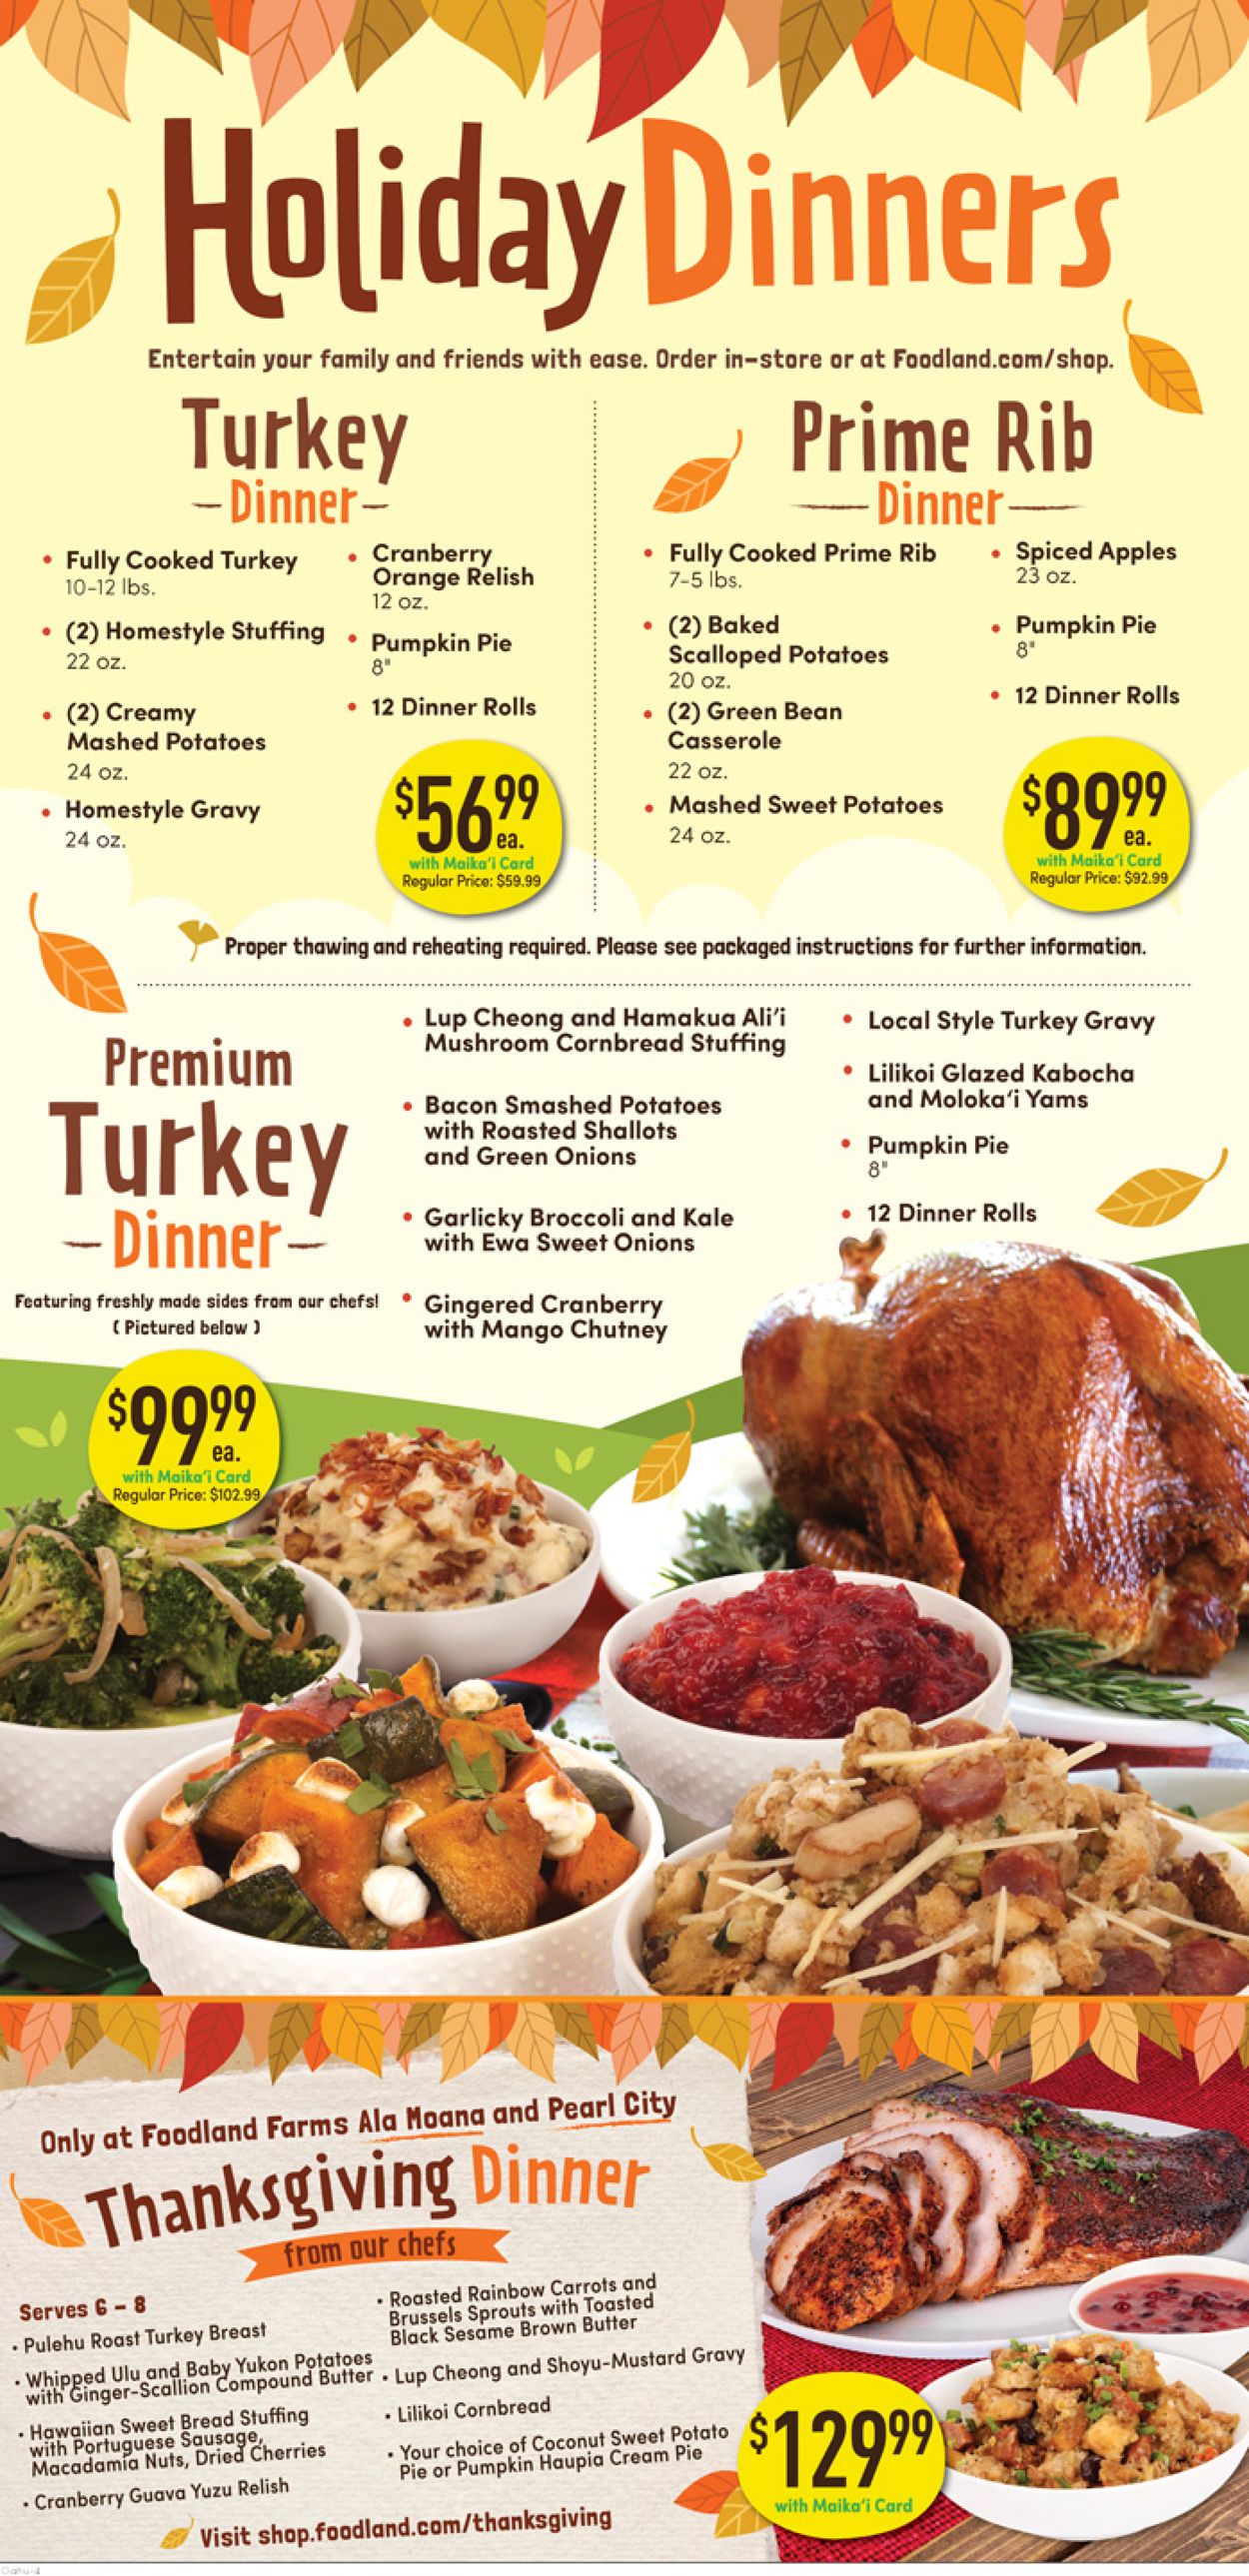 Foodland Current weekly ad 11/06 - 11/12/2019 [6] - frequent-ads.com